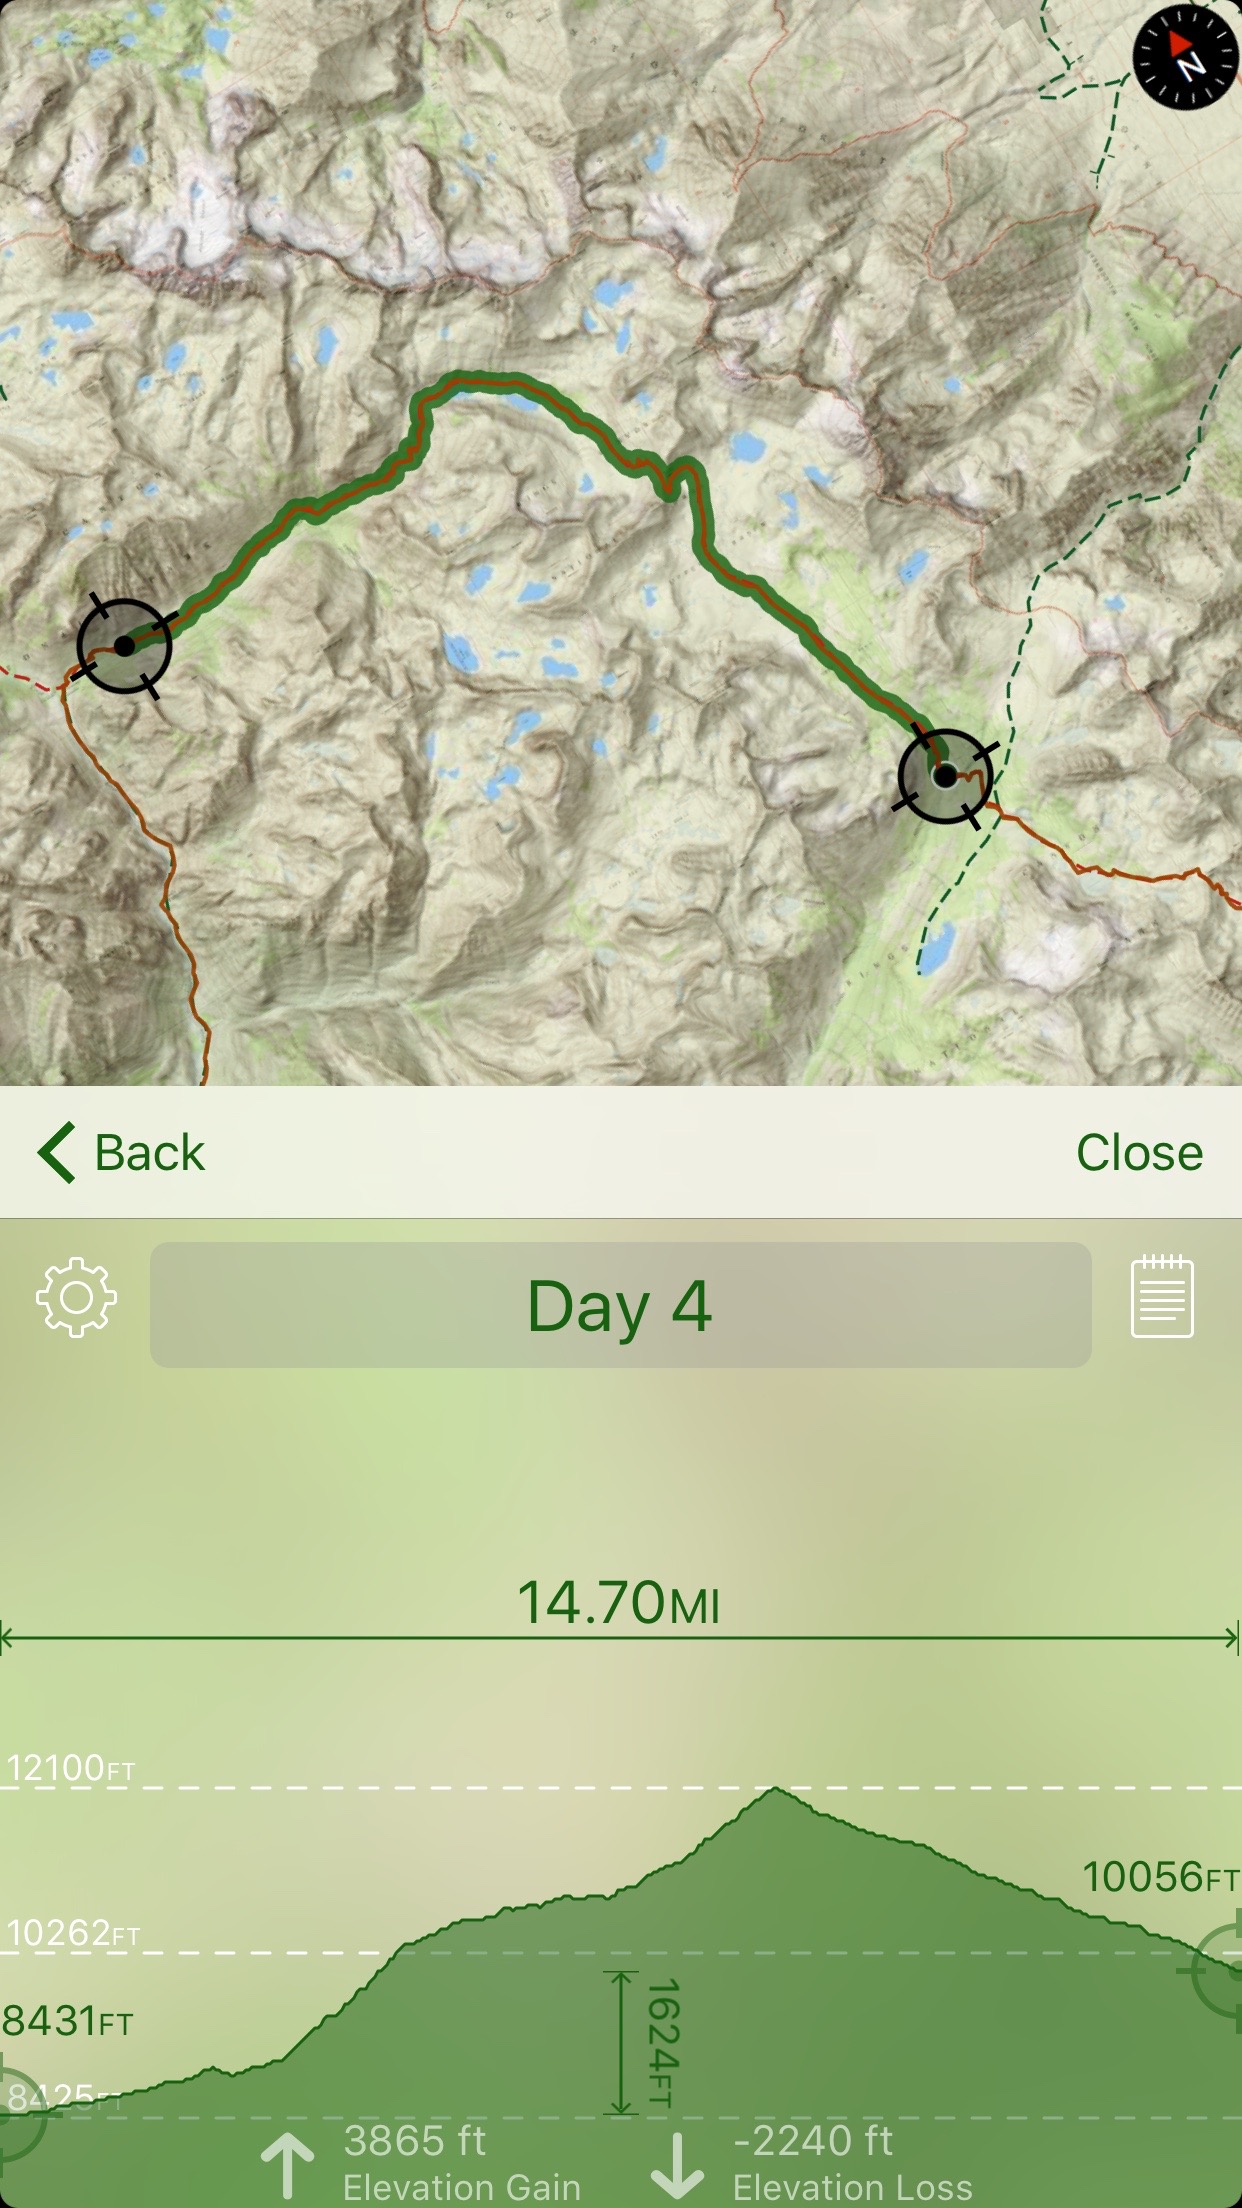 This is a day with some climbing, but only 3865' of elevation? Bring it.